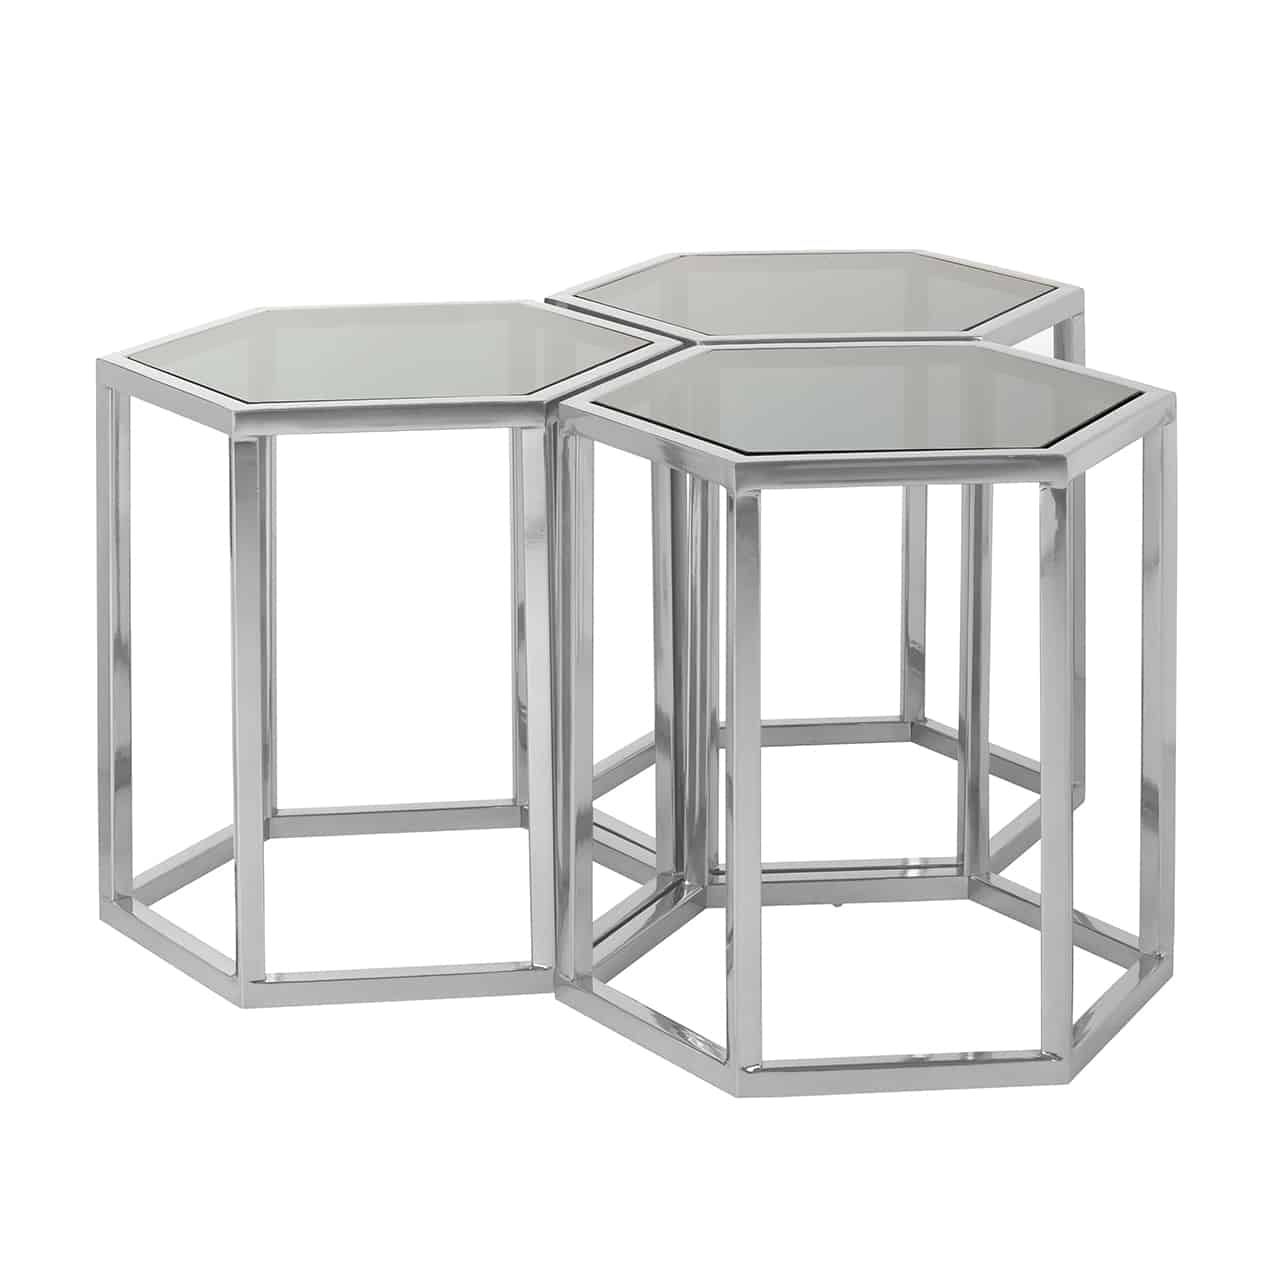 Coffee Tables Three Chrome | Chrome | Furnibay – Furniture Online Within Chrome Coffee Tables (View 1 of 20)